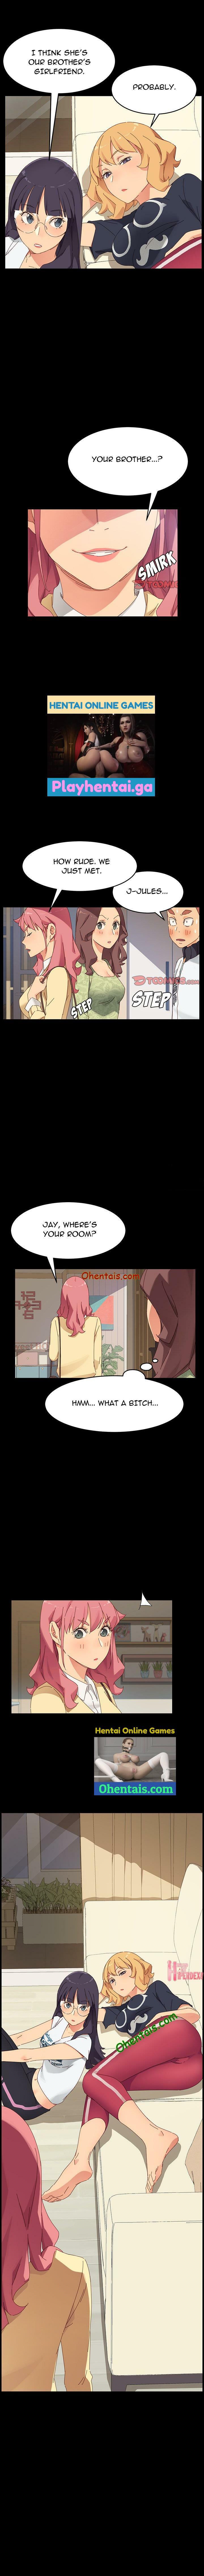 PERFECT ROOMMATES Ch. 7 7